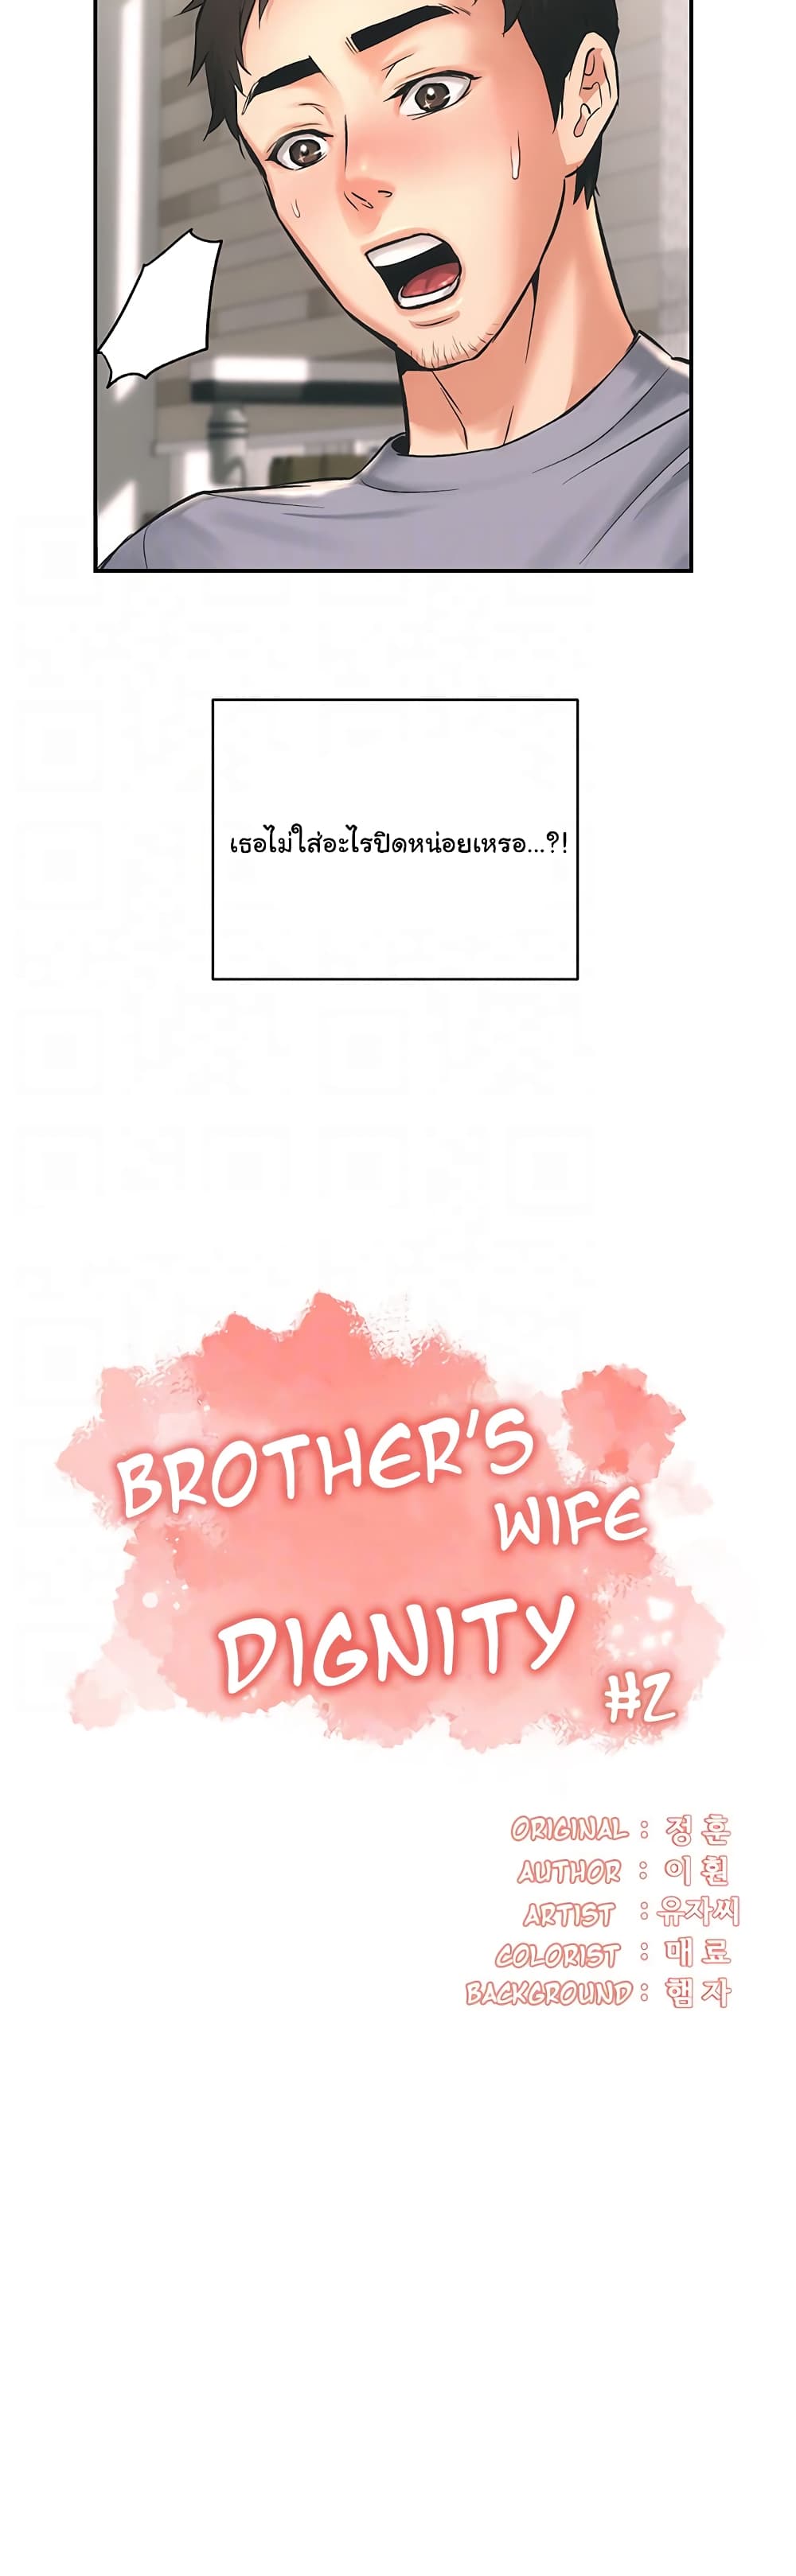 Brother's Wife Dignity 2-2